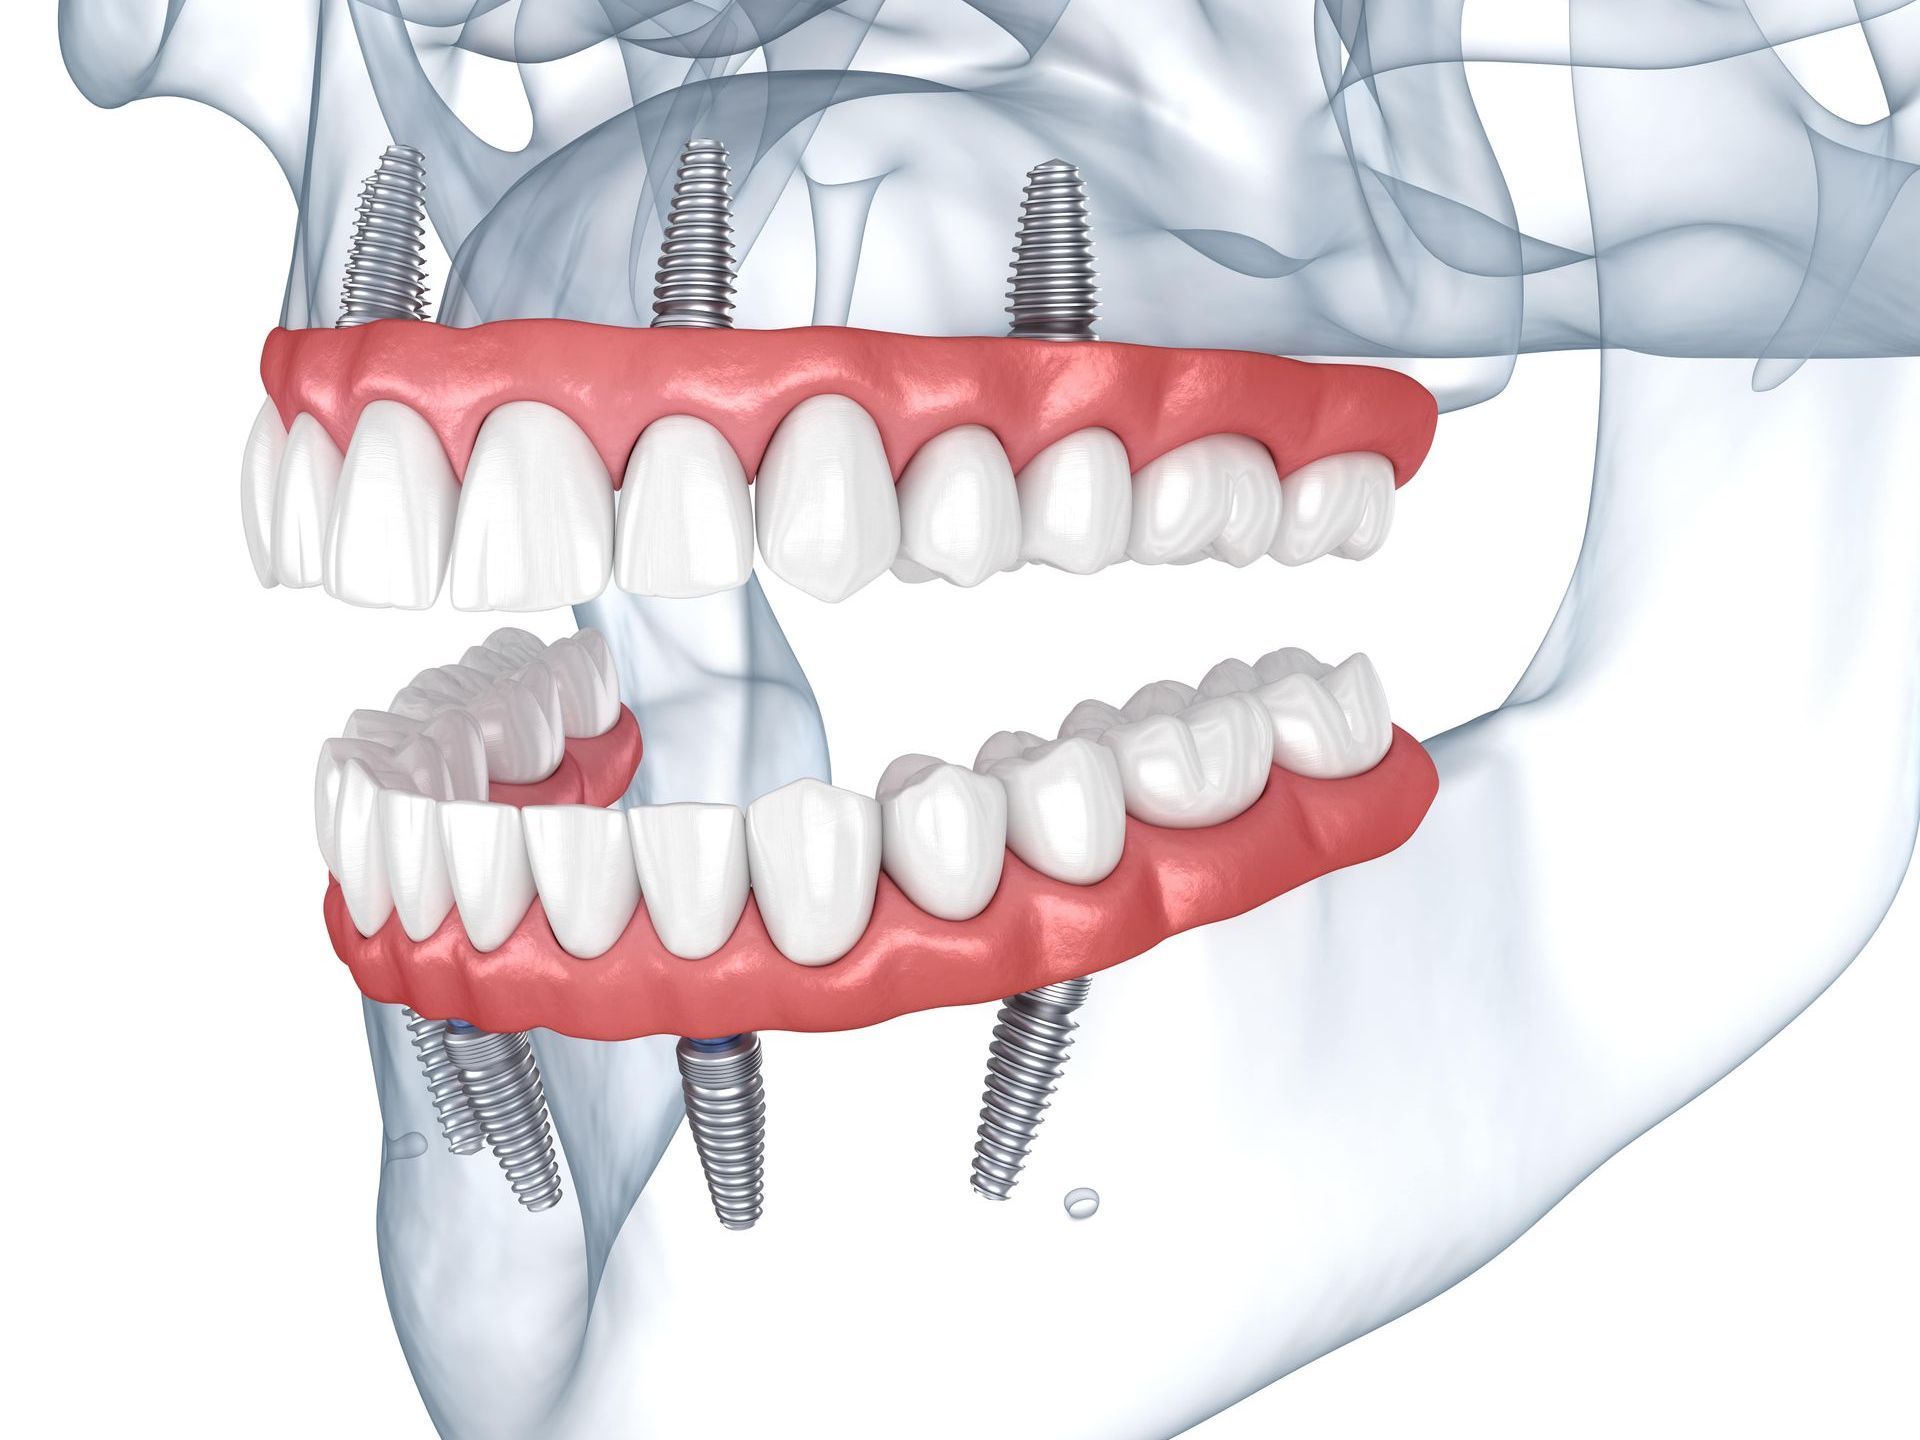 A computer generated image of a mouth reconstructed with upper and lower implants